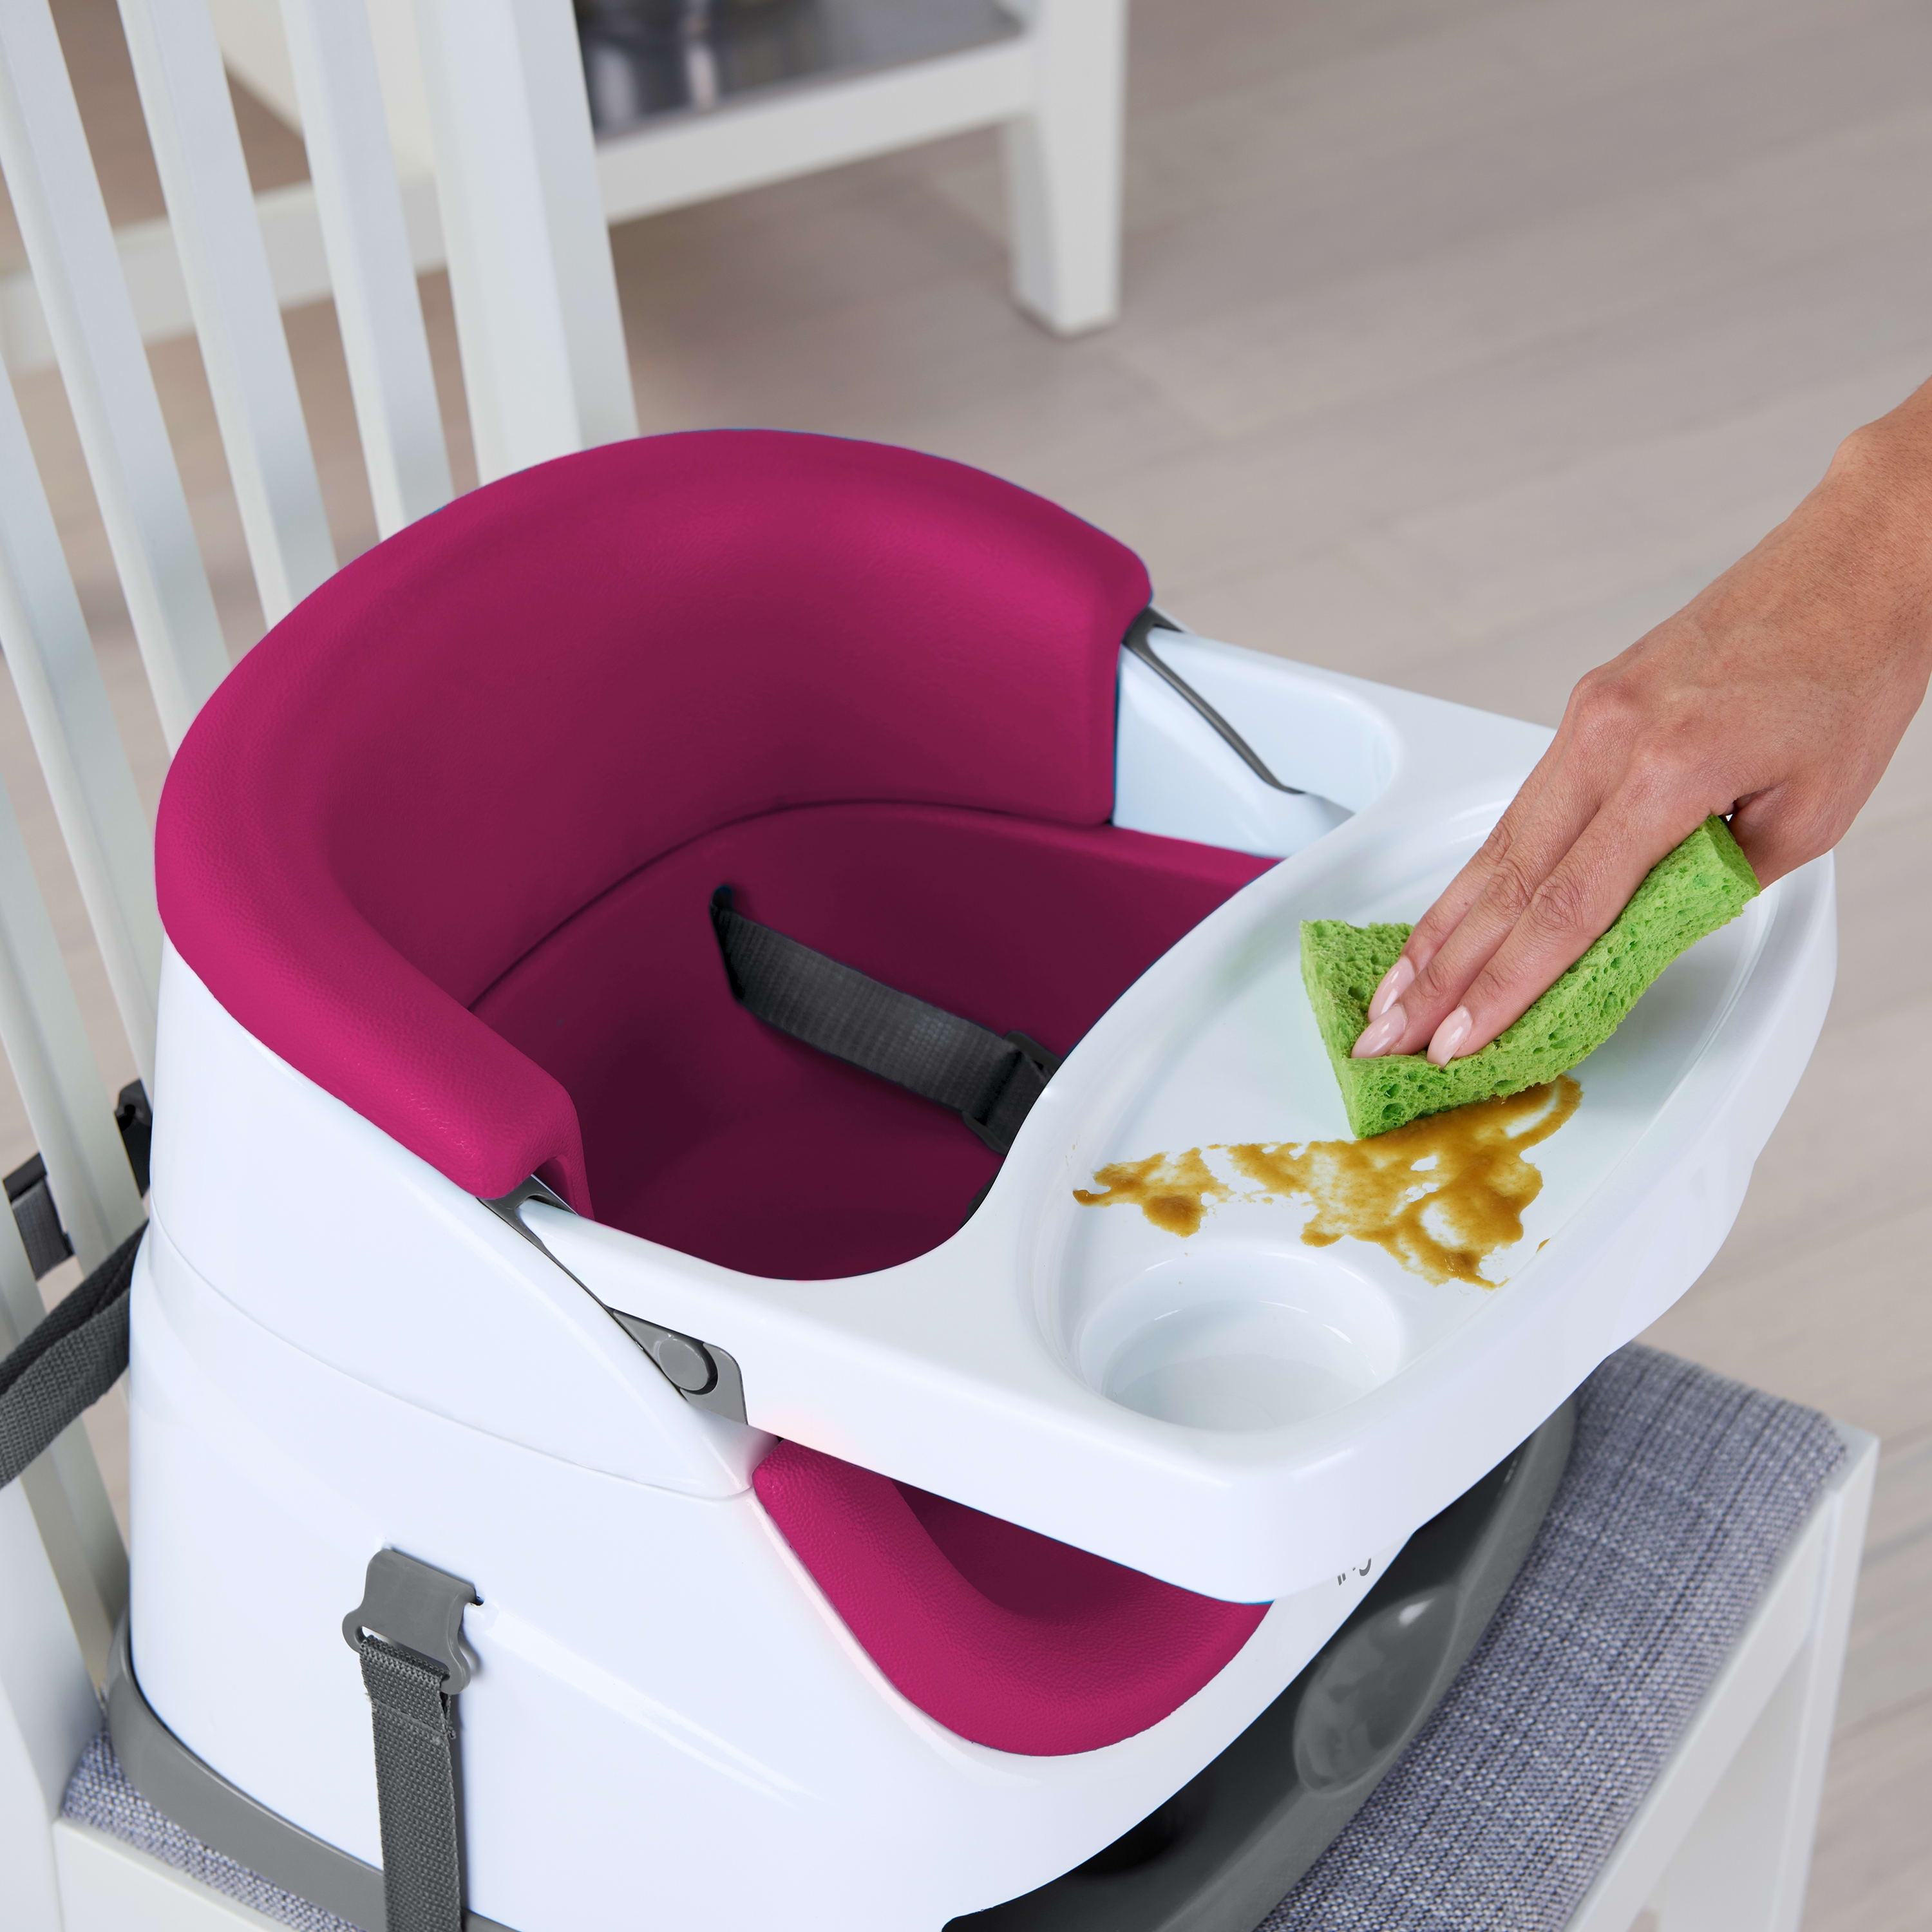 A Complete Ingenuity Baby Base Booster Seat Review - Parenthood Adventures